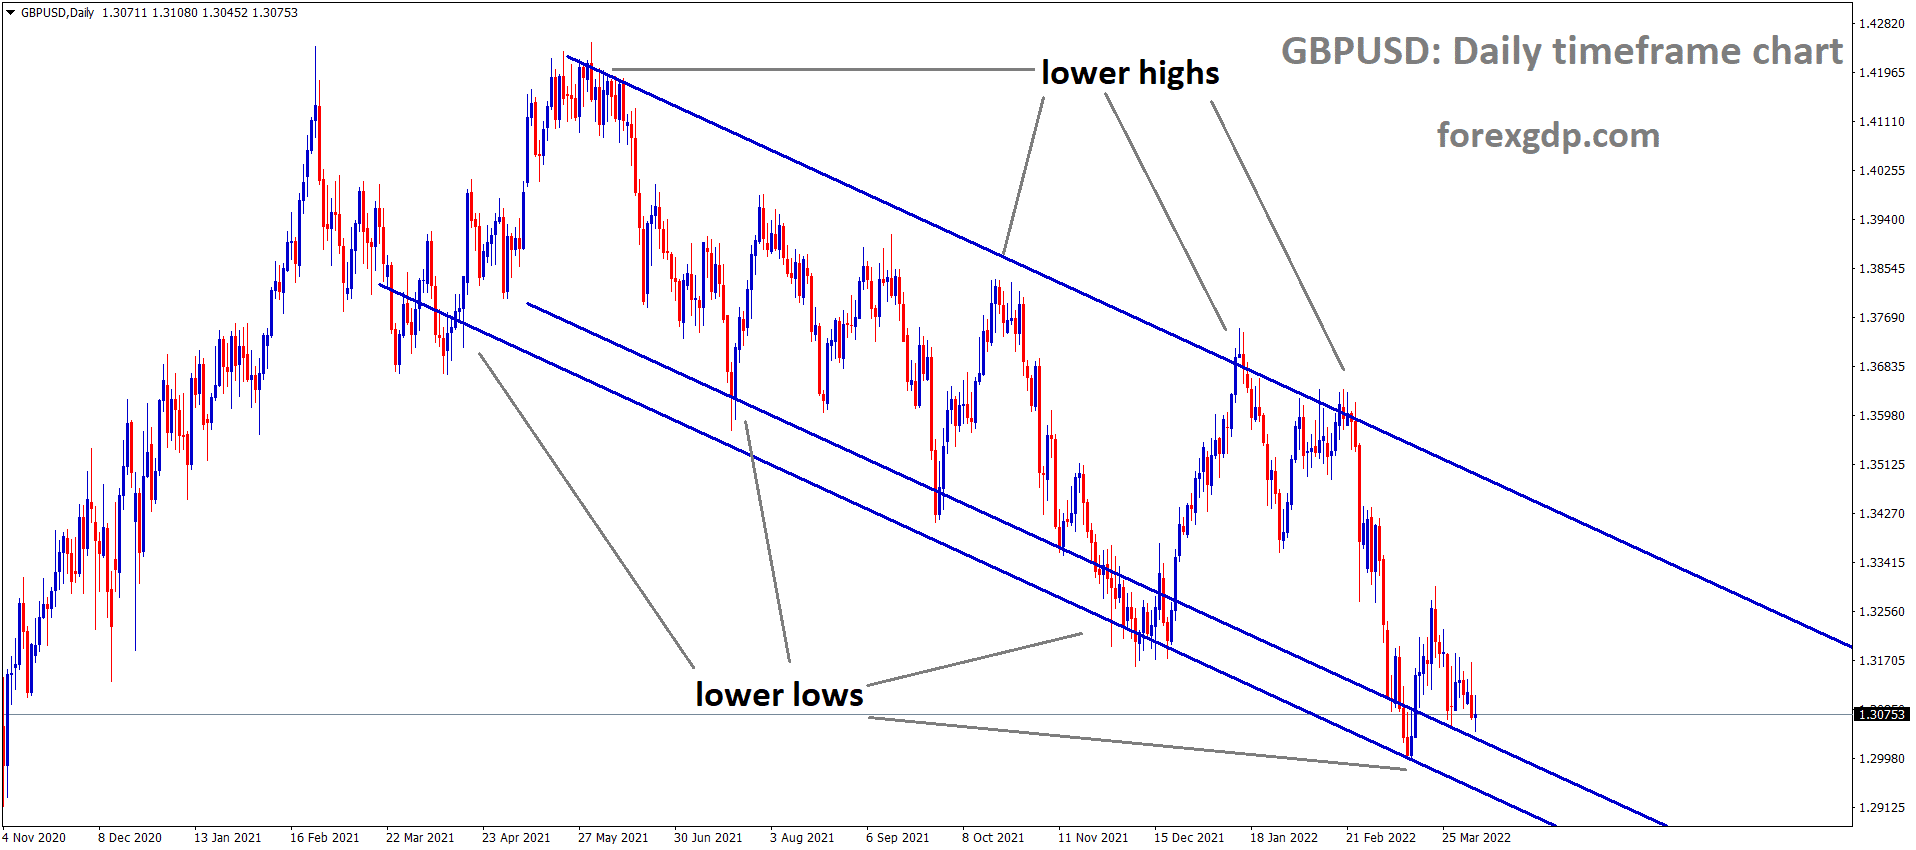 GBPUSD Daily Time Frame Market has reached the Lower Low Area of the Descending Channel.